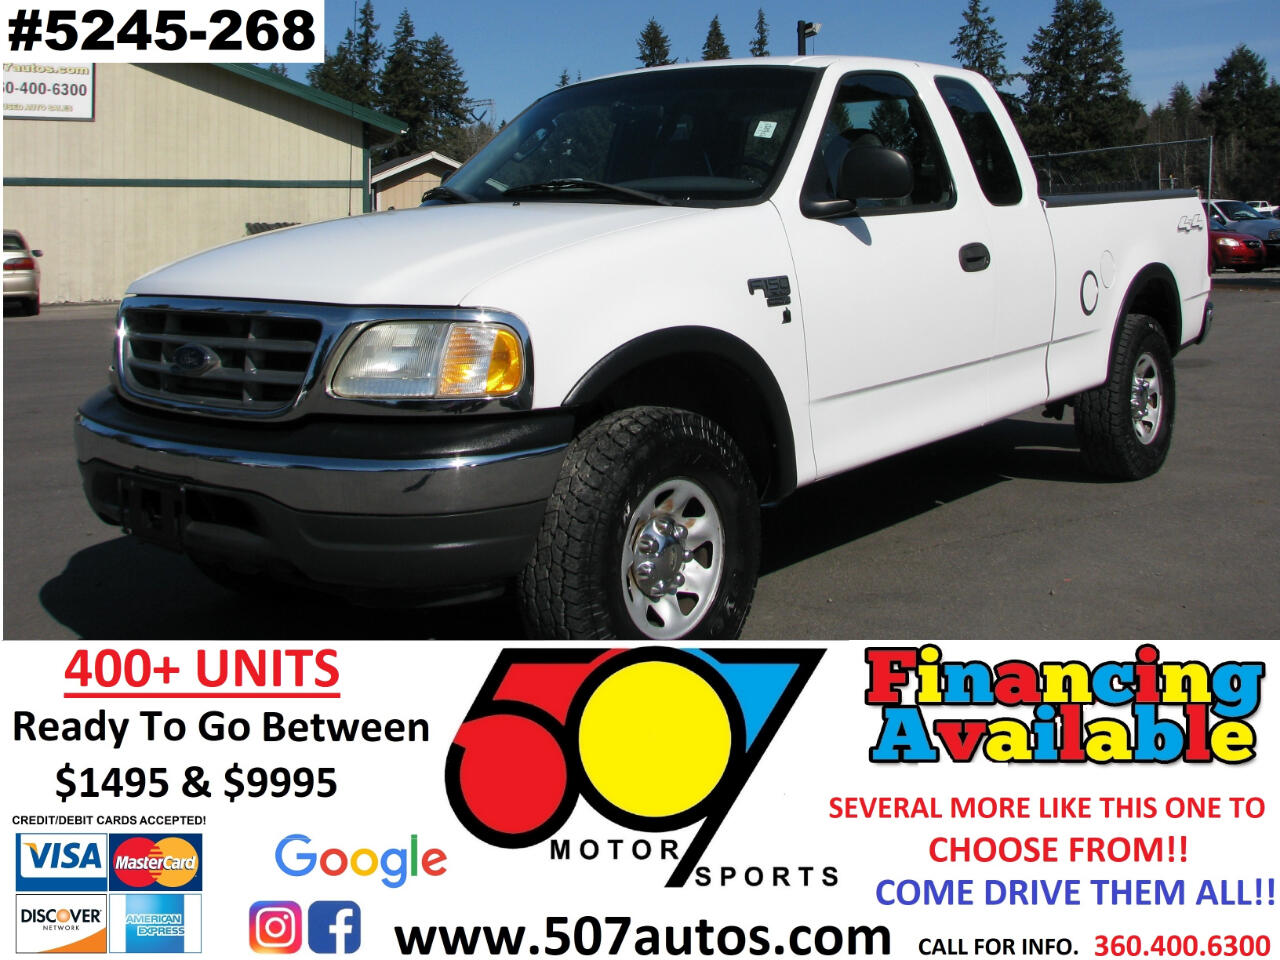 Used 2002 Ford F-150 4WD SuperCab 133" XLT for Sale in Roy WA 98580 507 2002 Ford F150 Xlt Triton V8 Towing Capacity